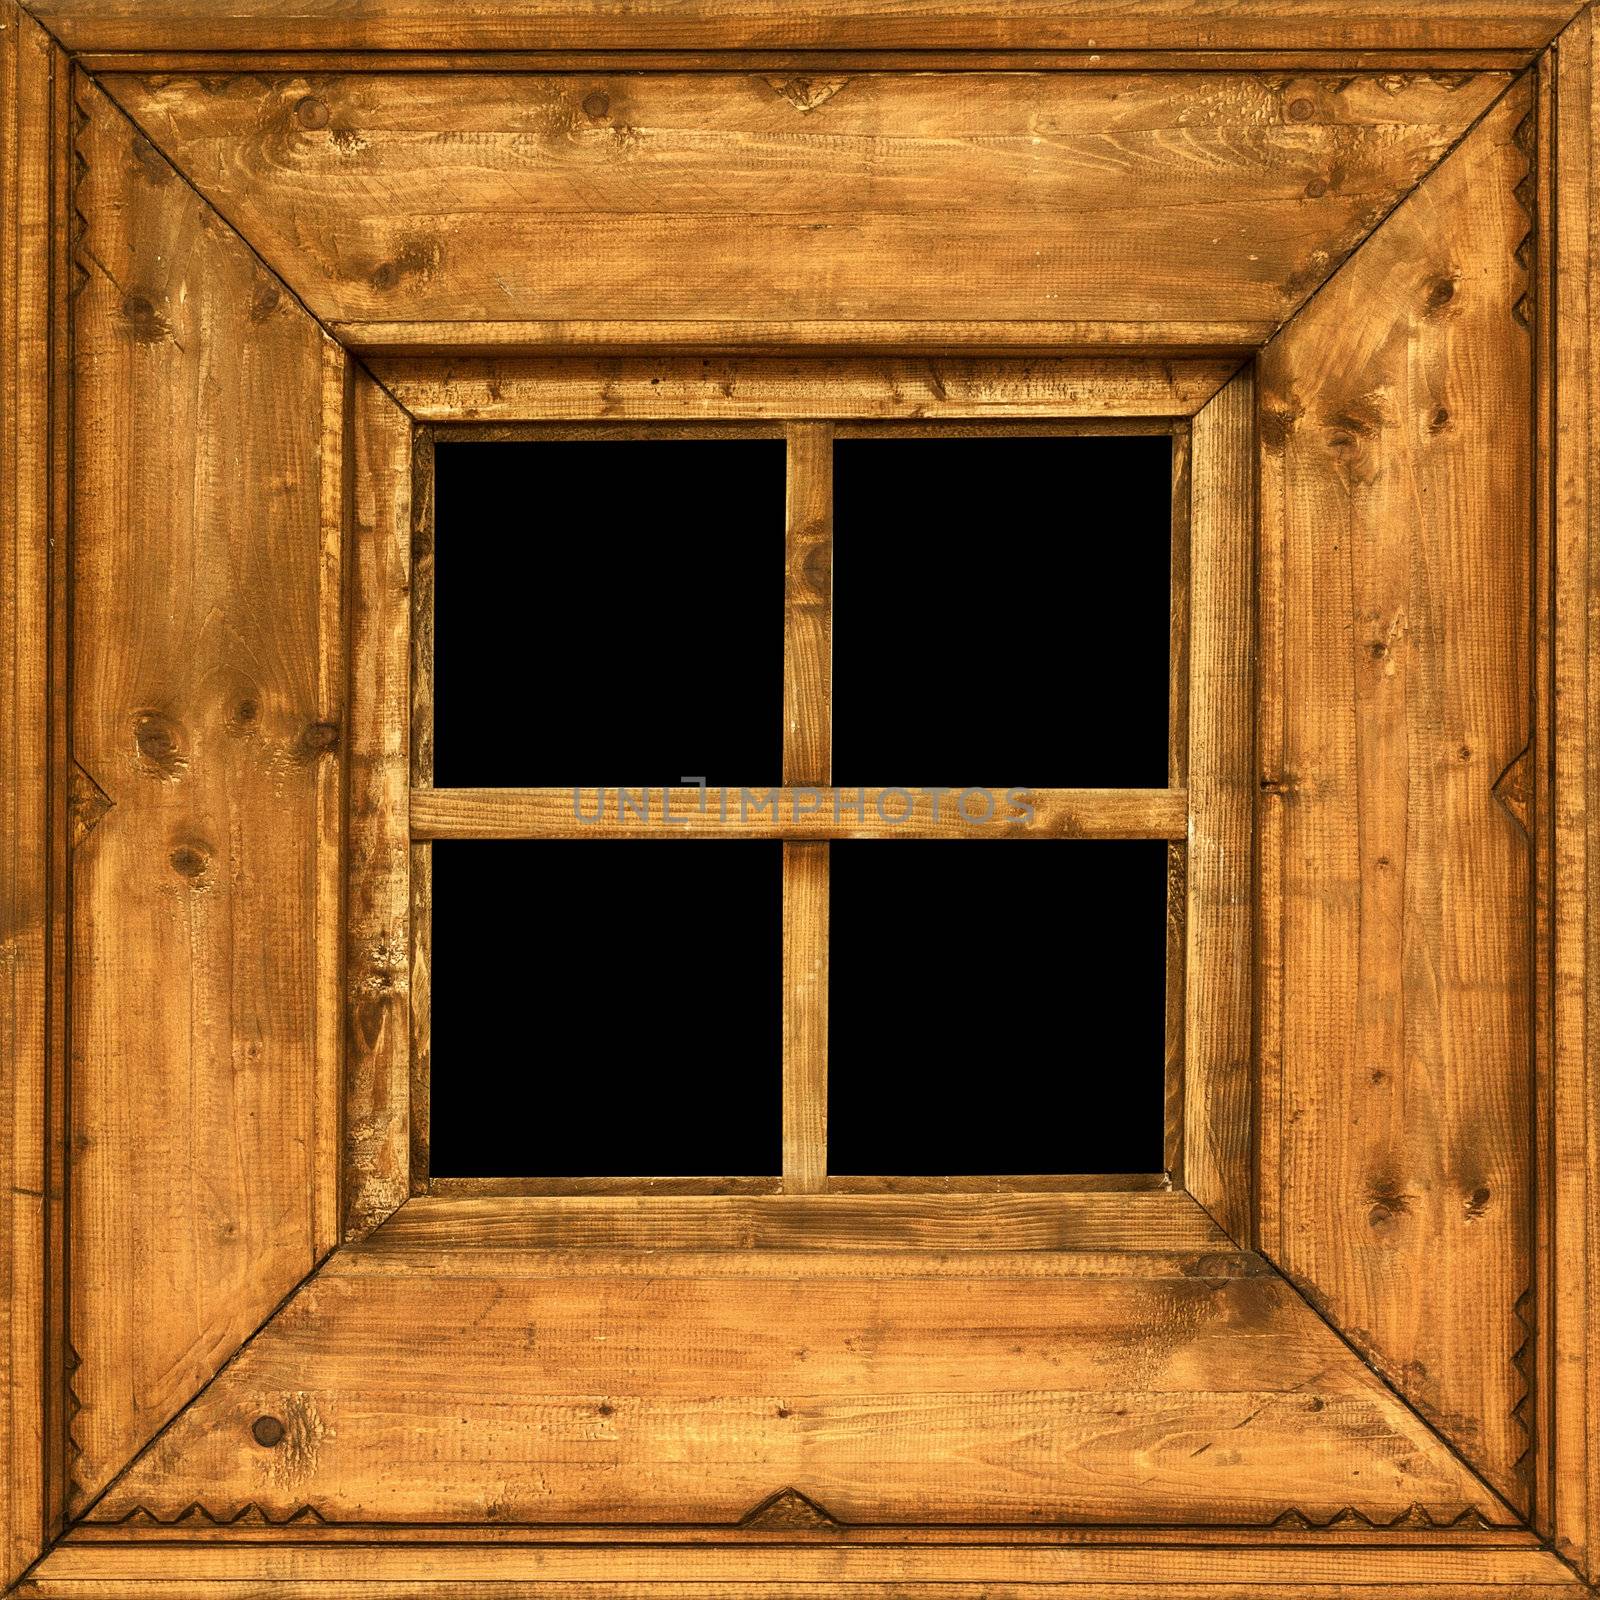 An old square wooden rural window frame